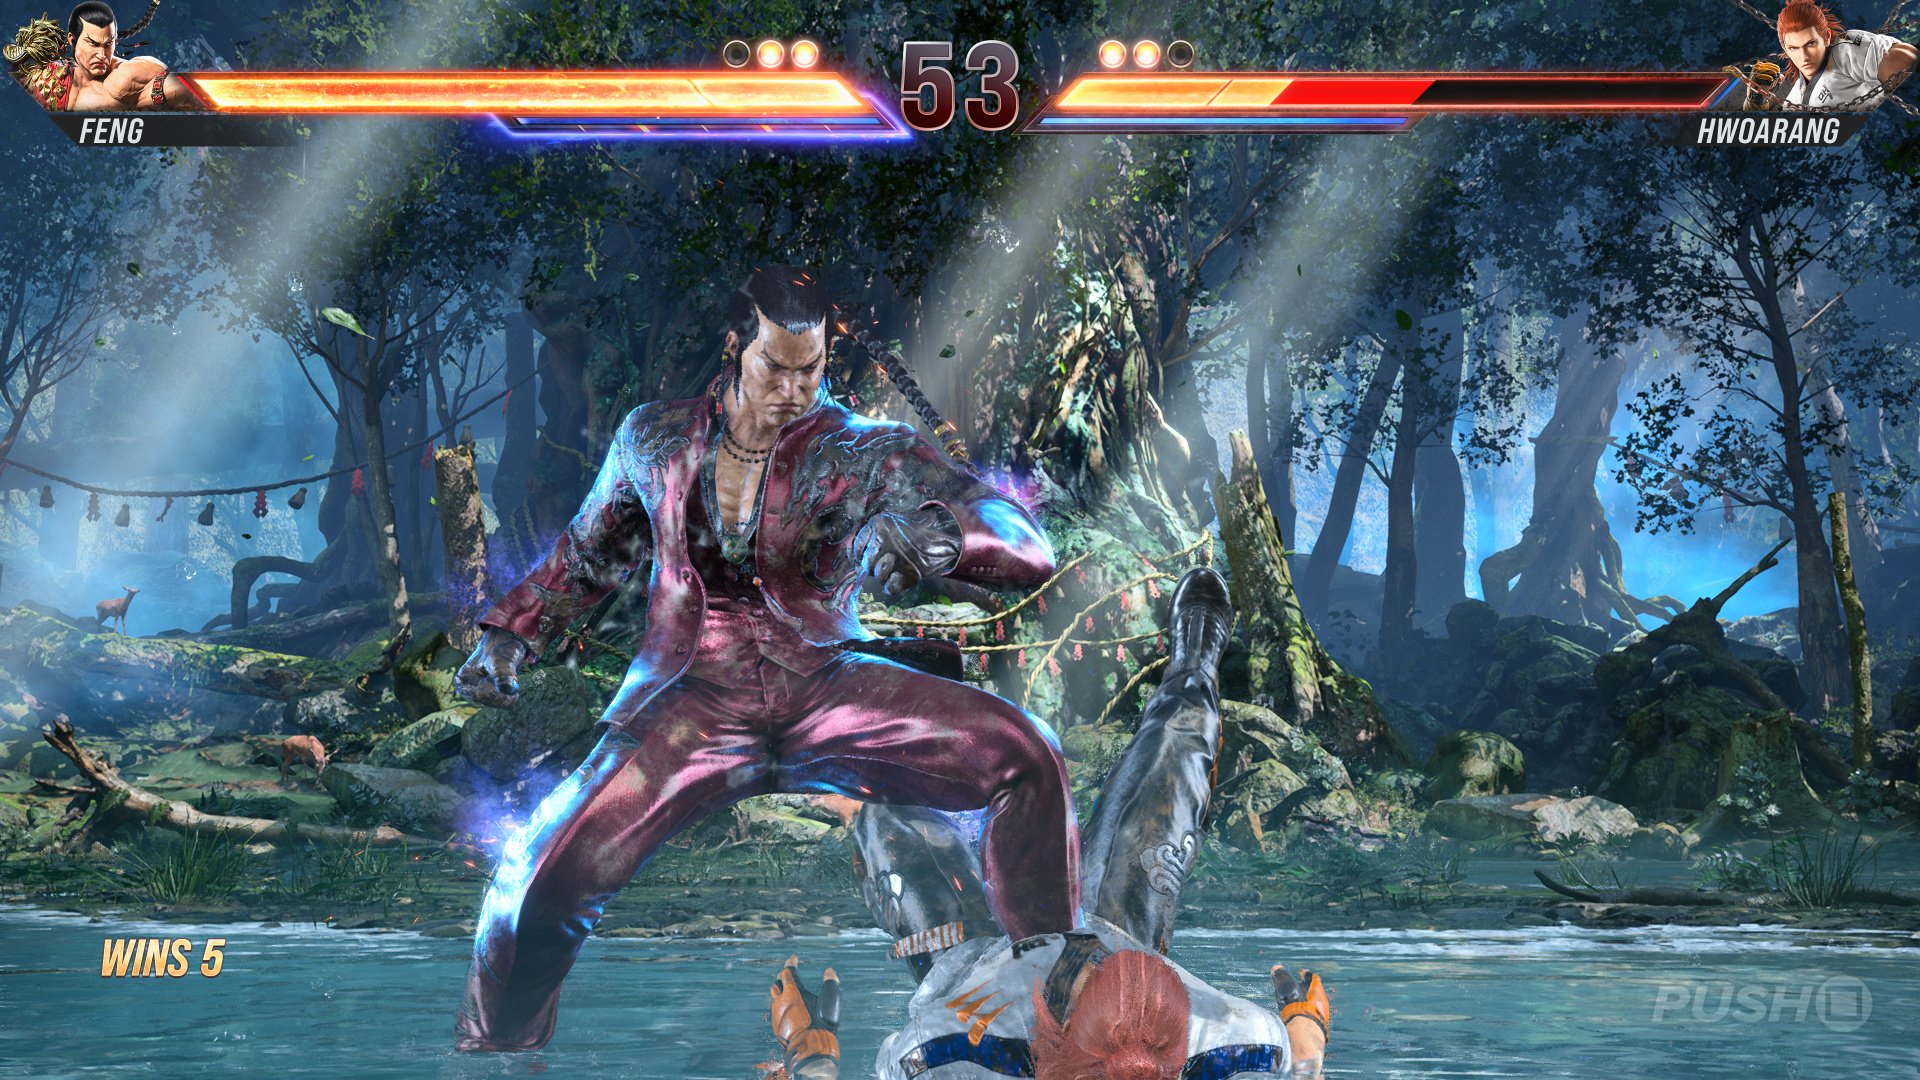 How Tekken 8 harnesses the power of PS5 – out January 26, 2024